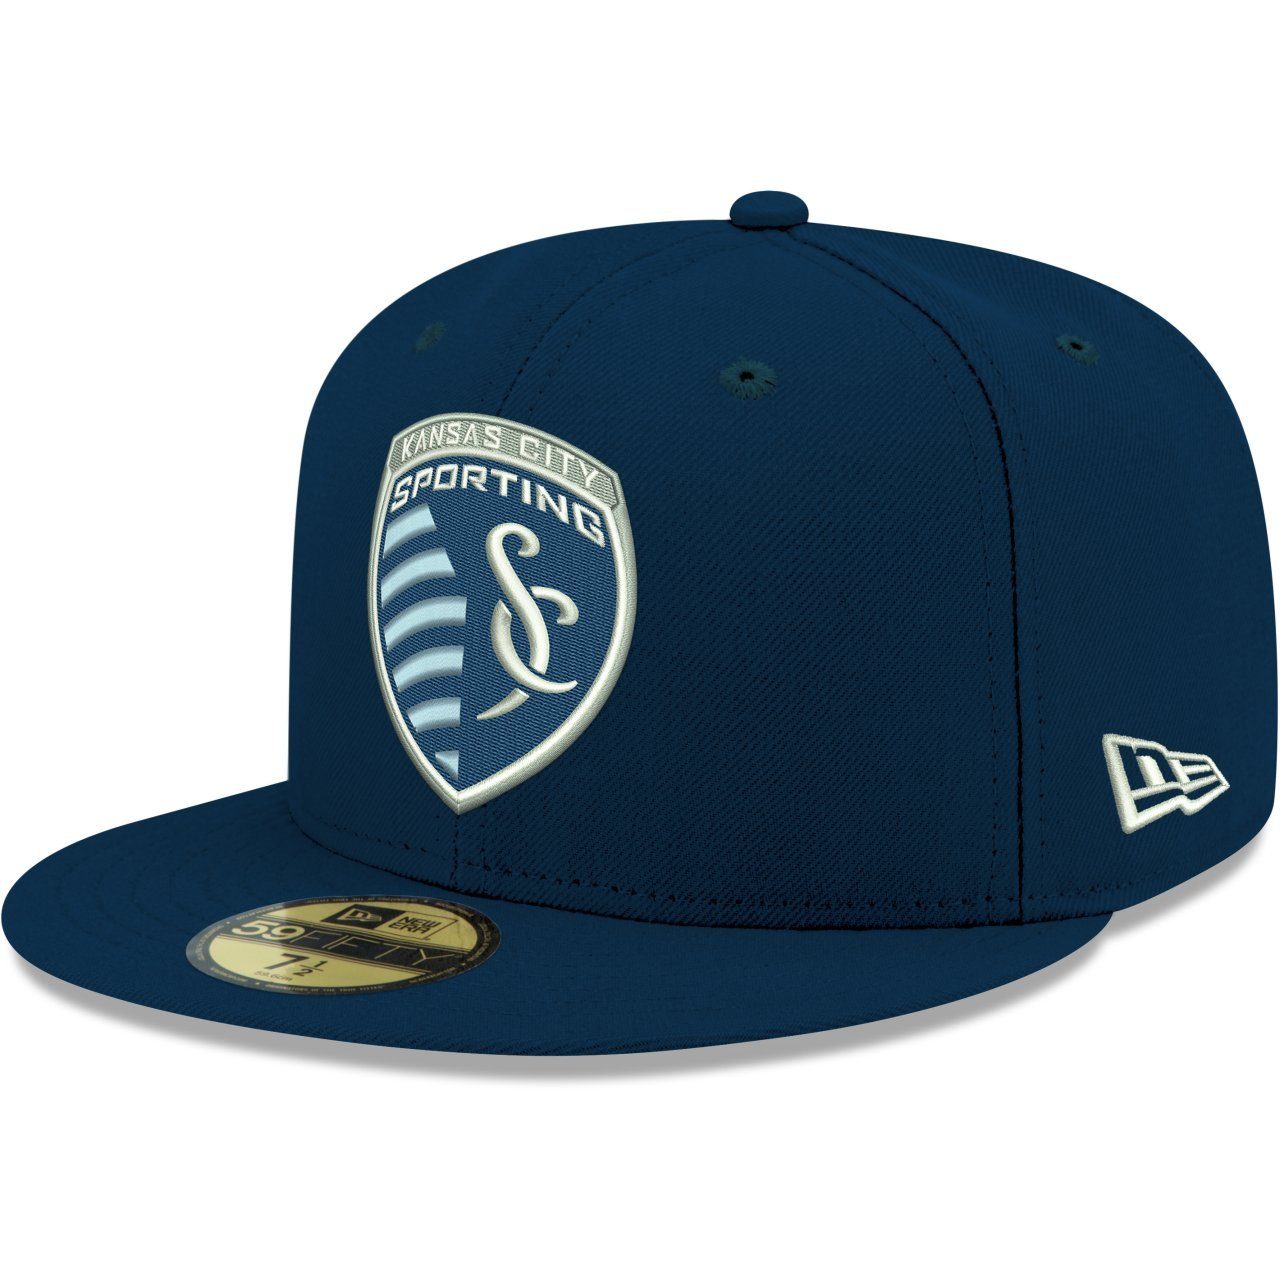 New Era Fitted Cap 59Fifty MLS Sporting Kansas City